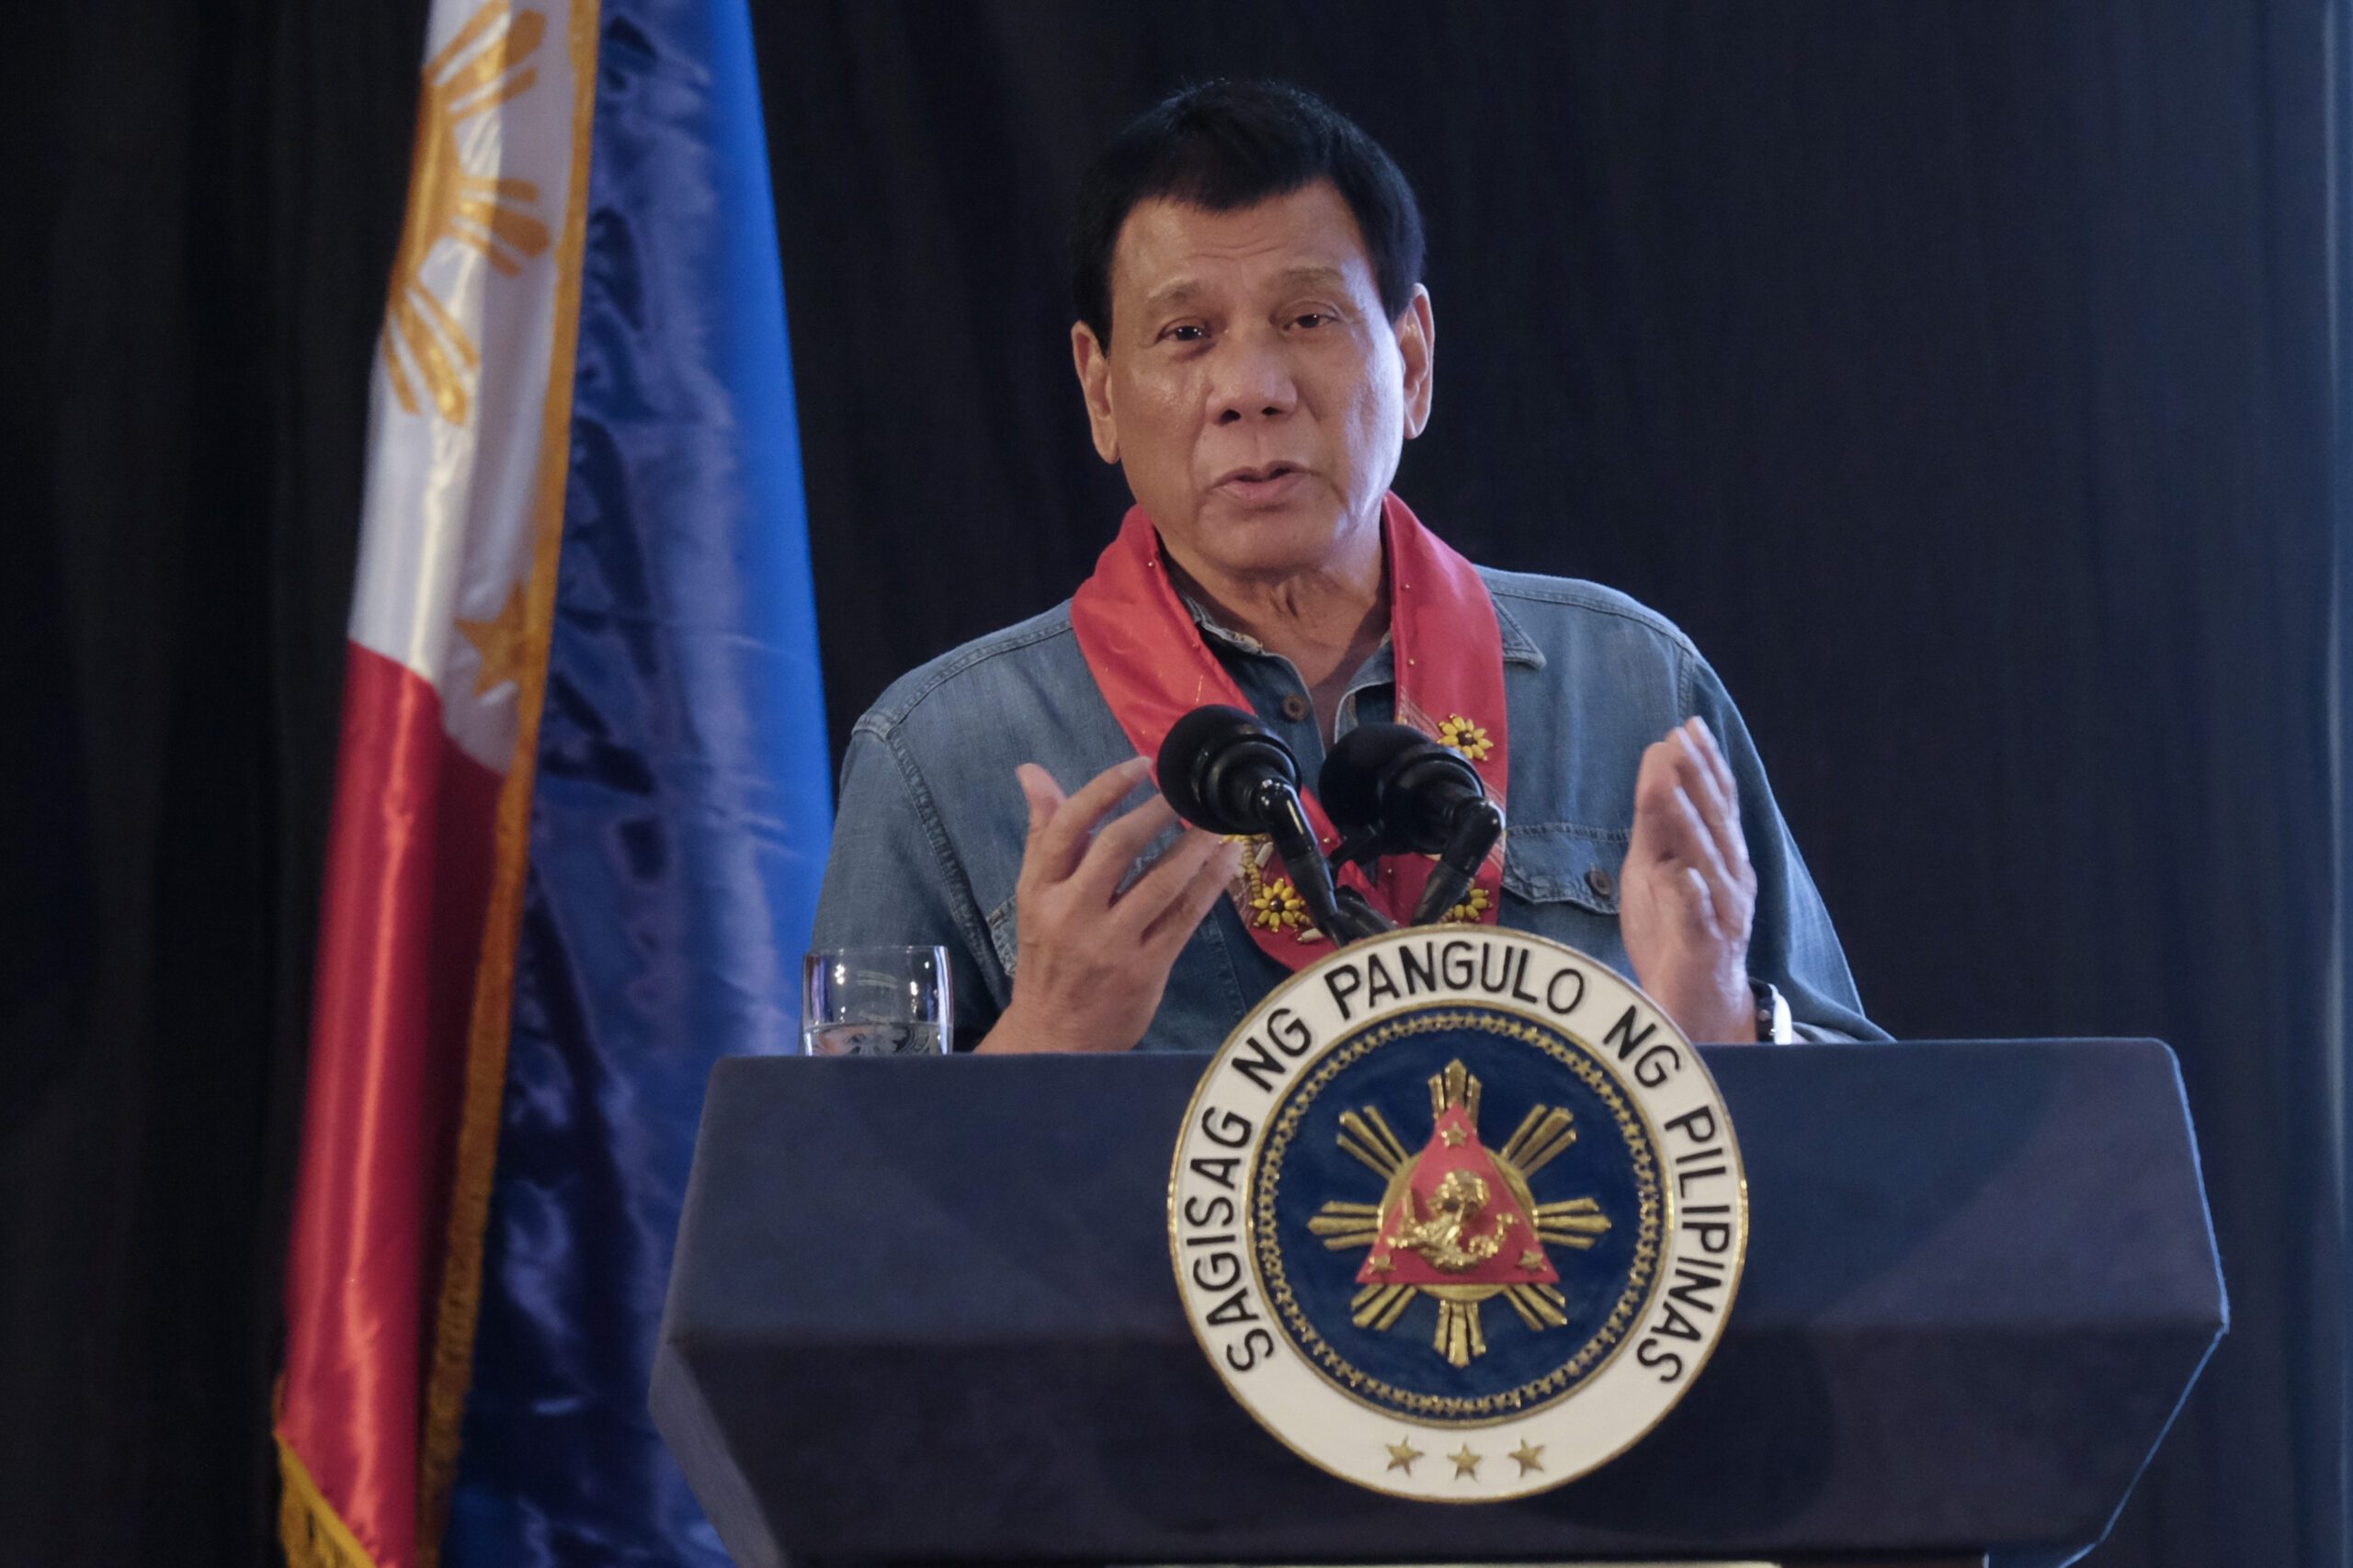 Palace defends Duterte: He’s ‘more visionary’, ‘transformational’